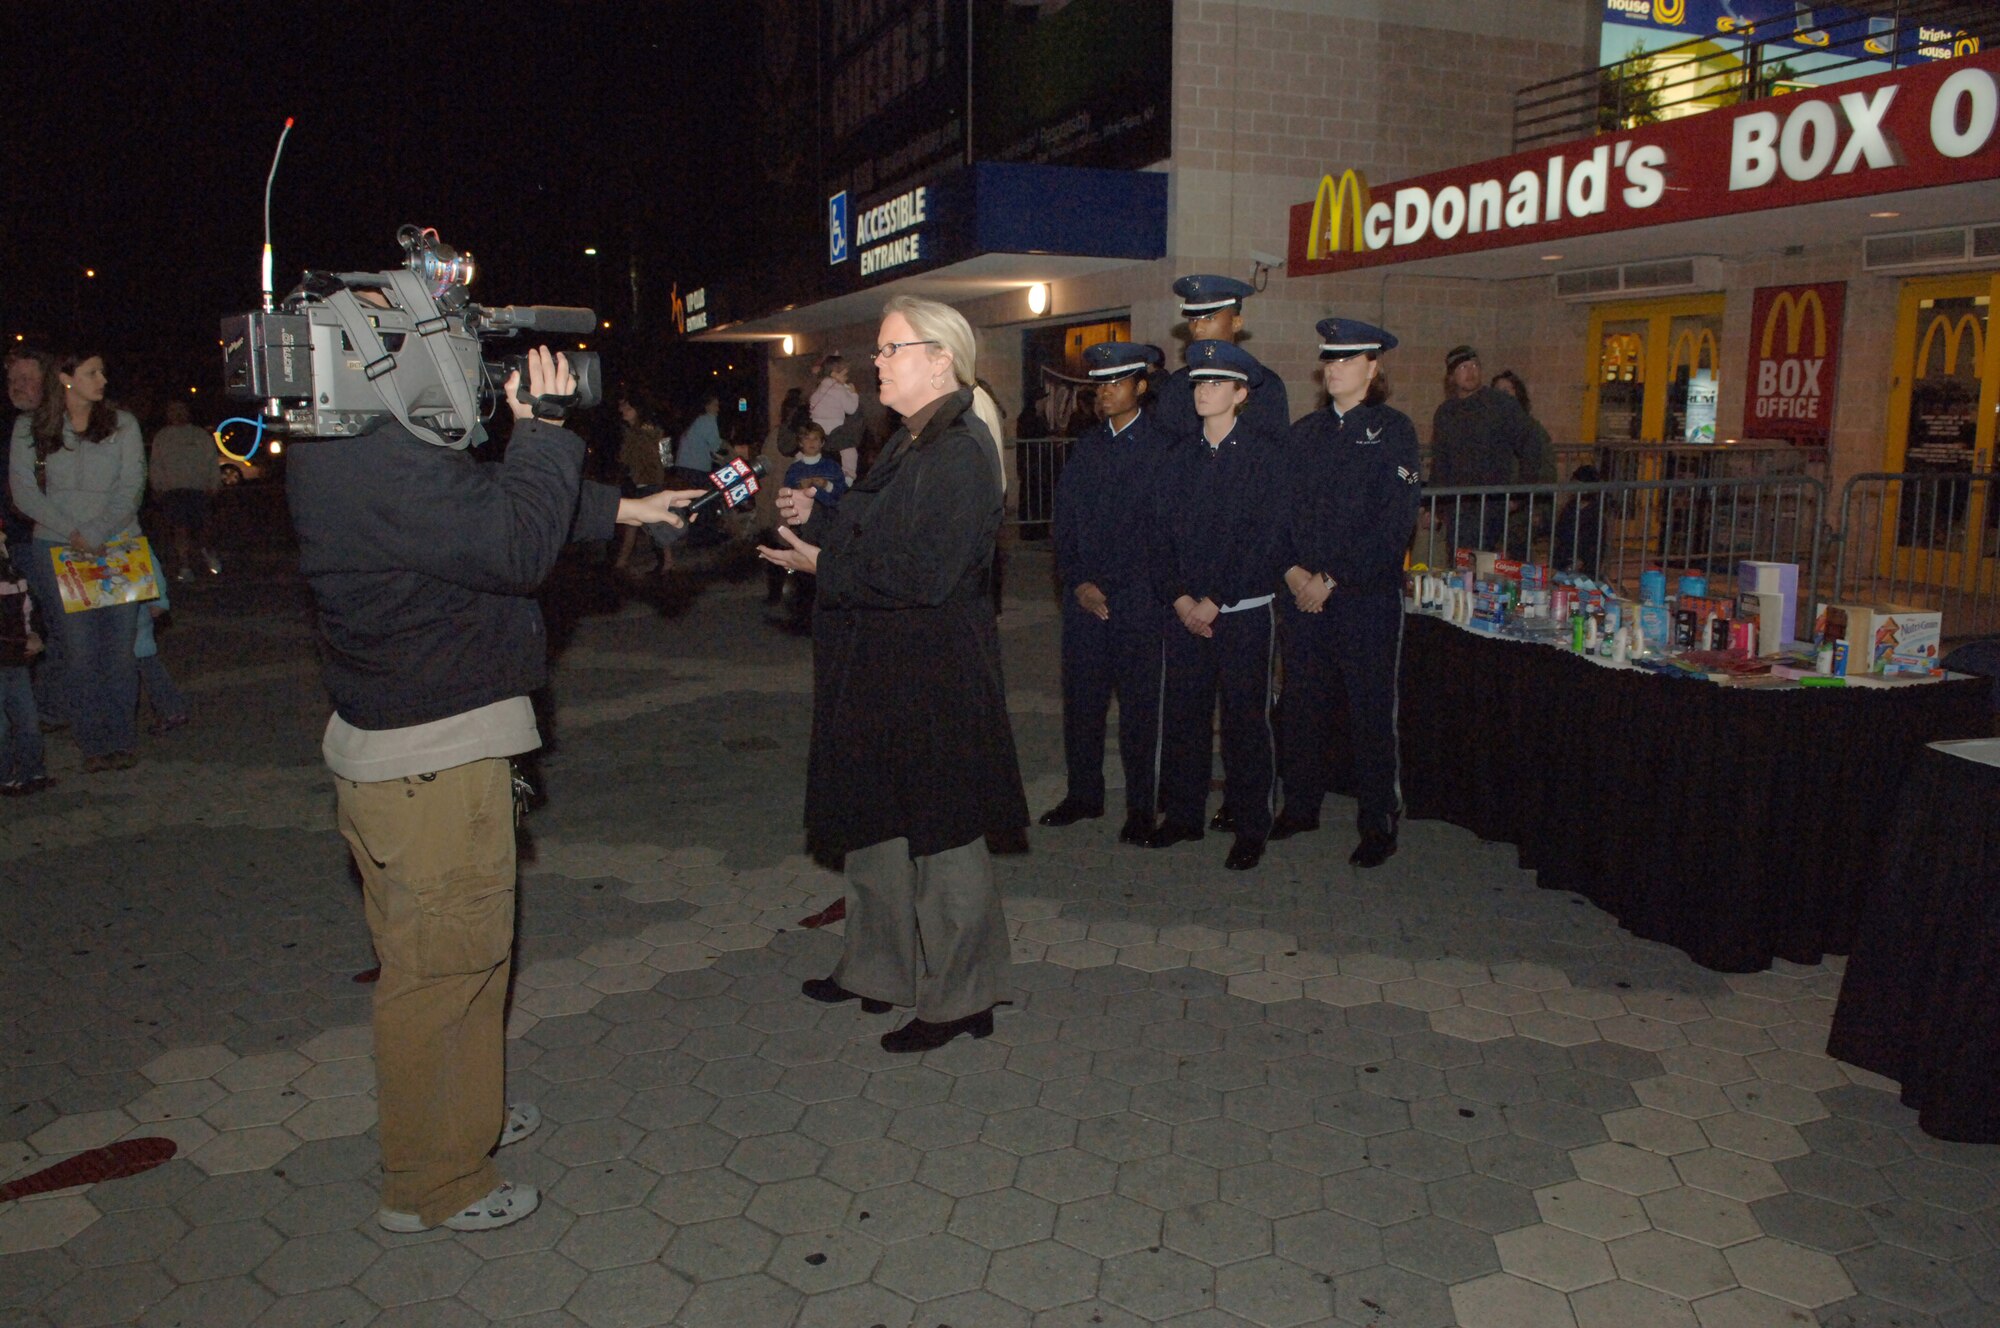 Melinda Hartline, Regional Public Relations Manager for Feld Entertainment gives a interview with the MacDill AFB Honor Guard in the back ground before the start of the Ringling Bros. and Barnum & Bailey Circus at the St. Pete Times Forum in Tampa, Fla, Jan. 4.  (U.S. Air Force photo by Staff Sgt. Joseph Swafford, Jr.)(Released)